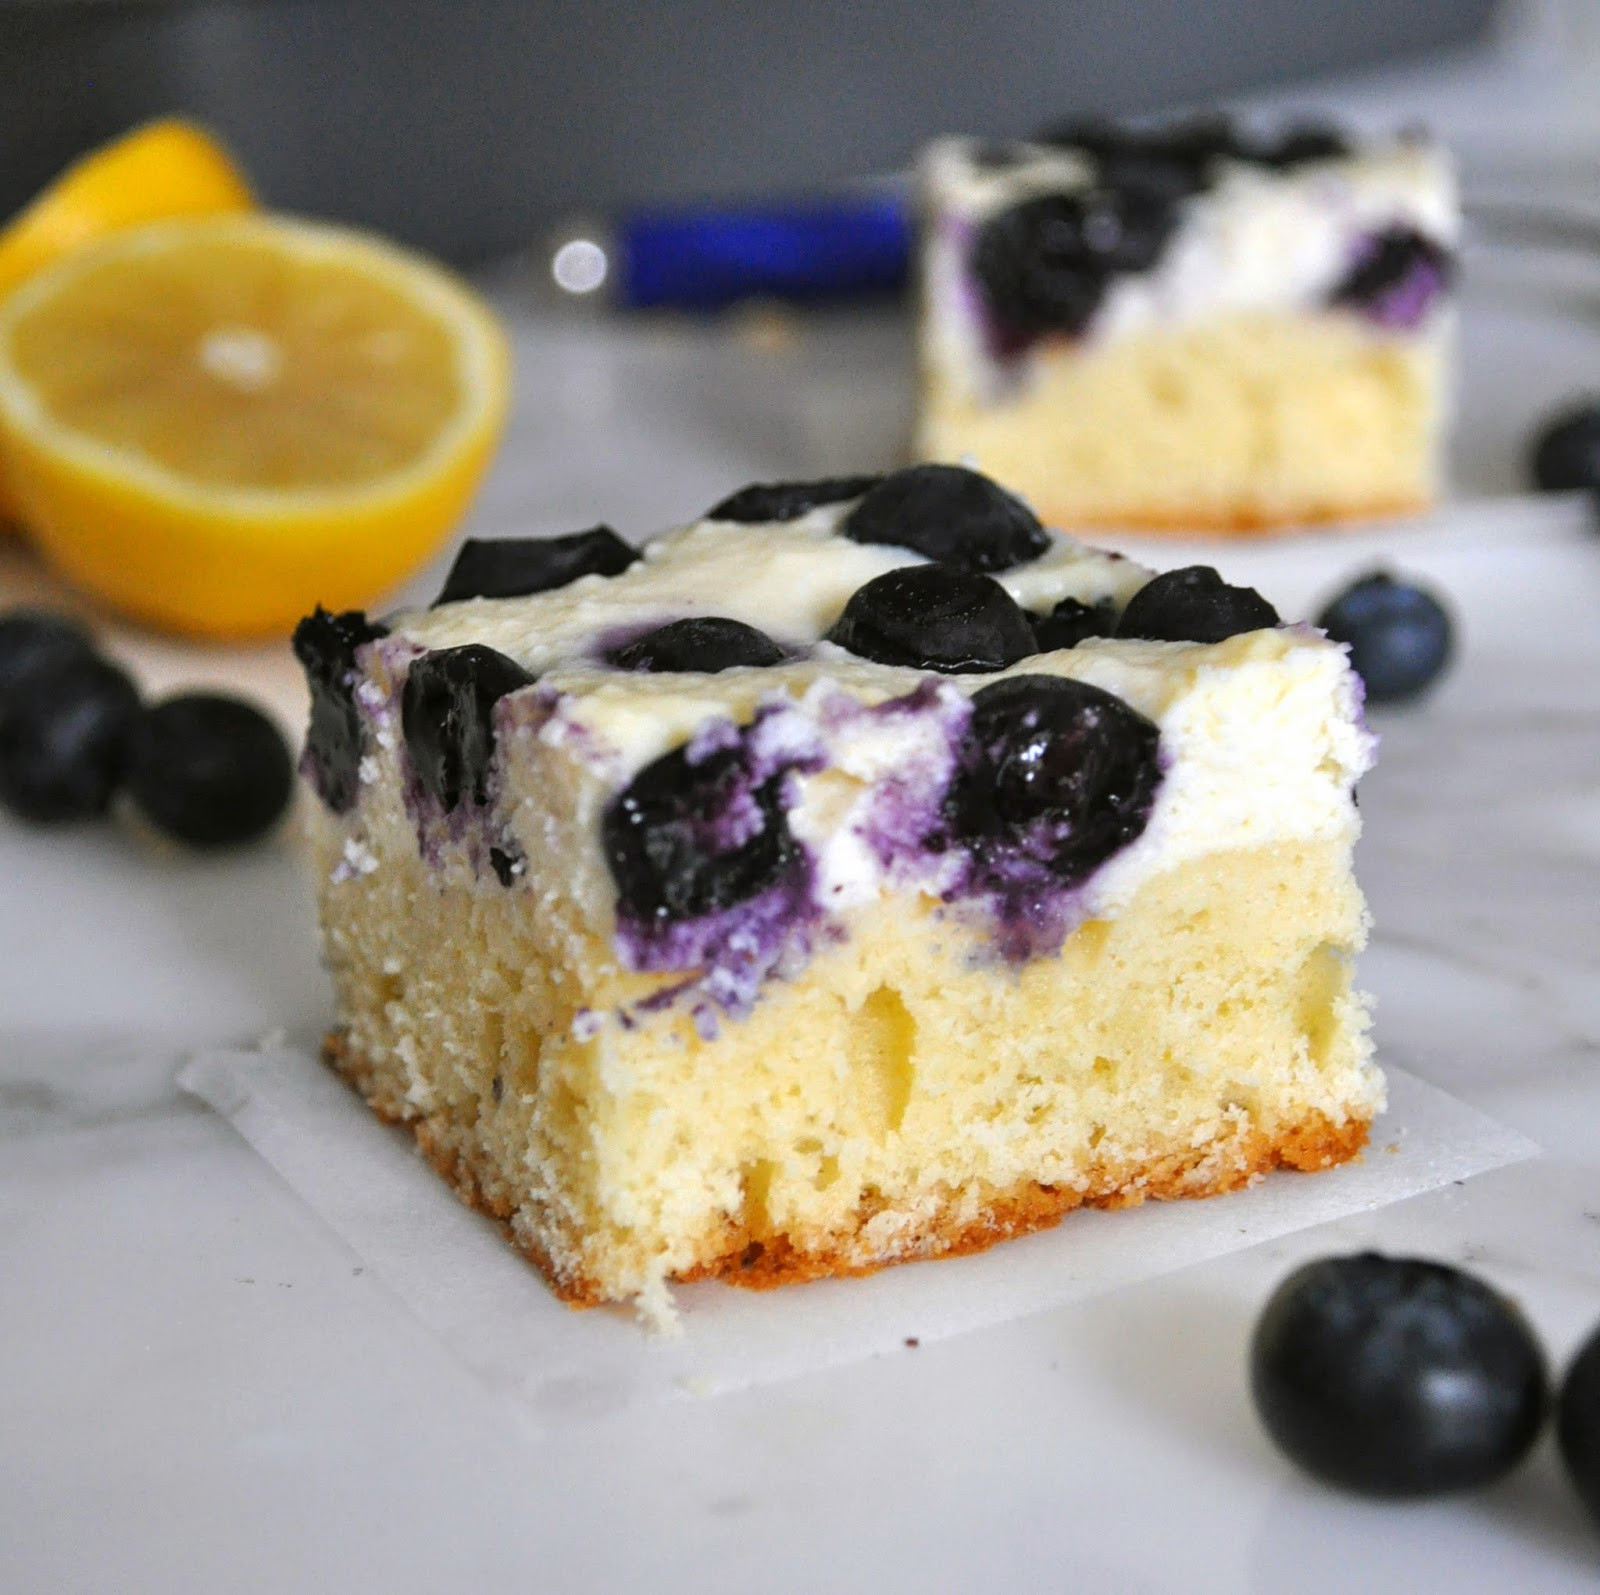 Ricotta Cheese Desserts
 Cooking with Manuela Blueberry and Ricotta Cheese Bars